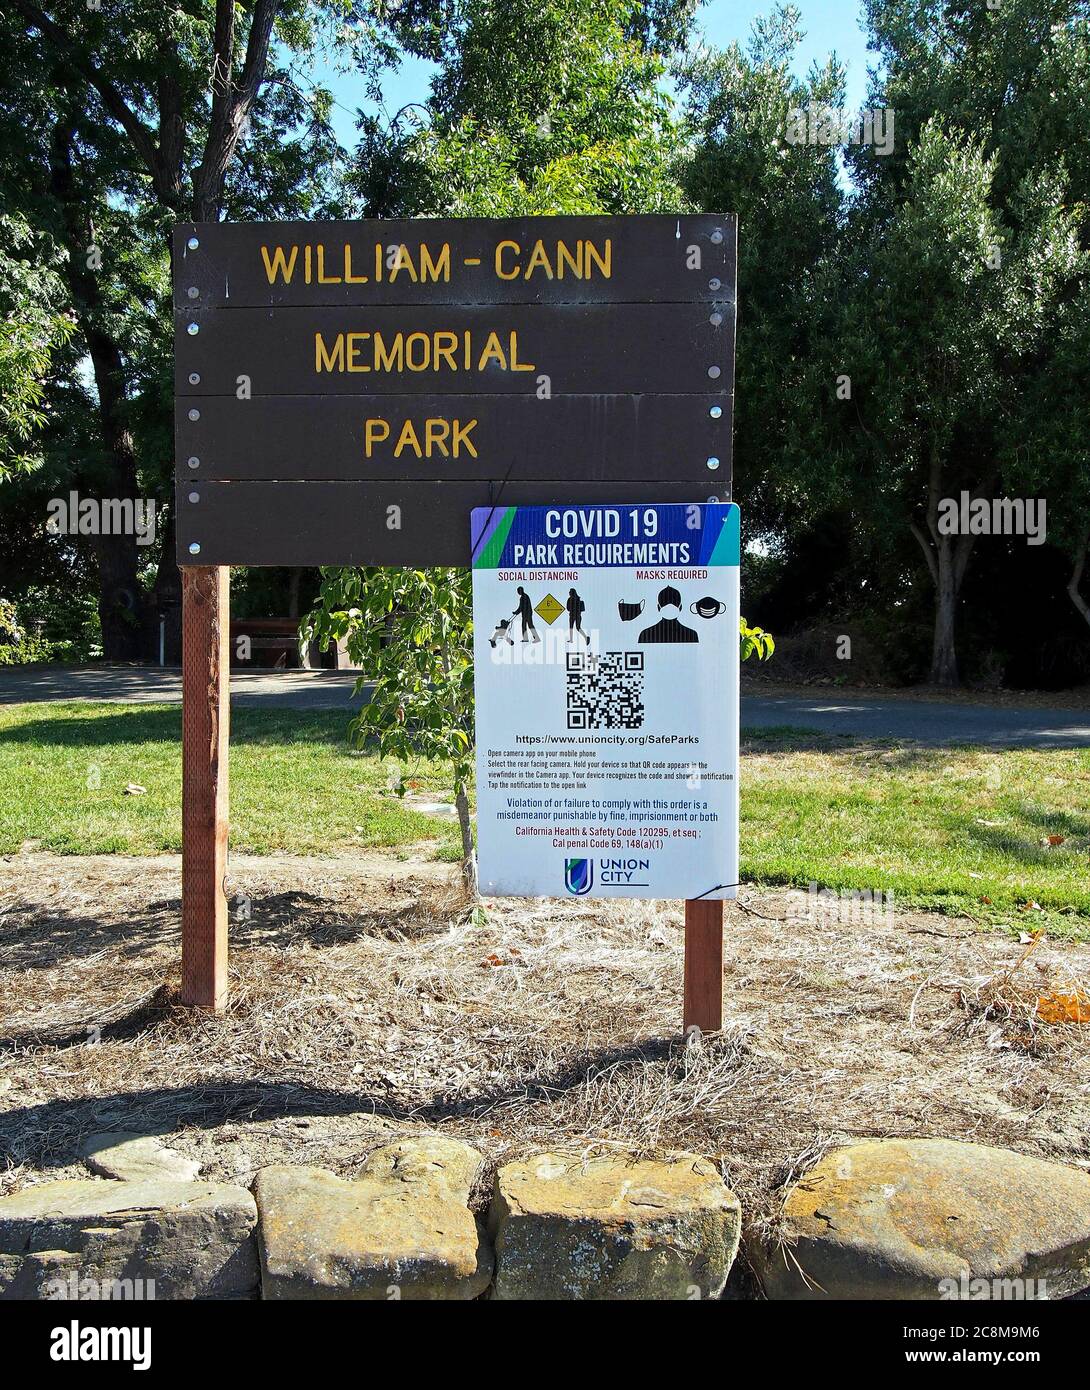 Covid 19 Park requirements sign at entrance to William  Cann Park in Union City, California Stock Photo